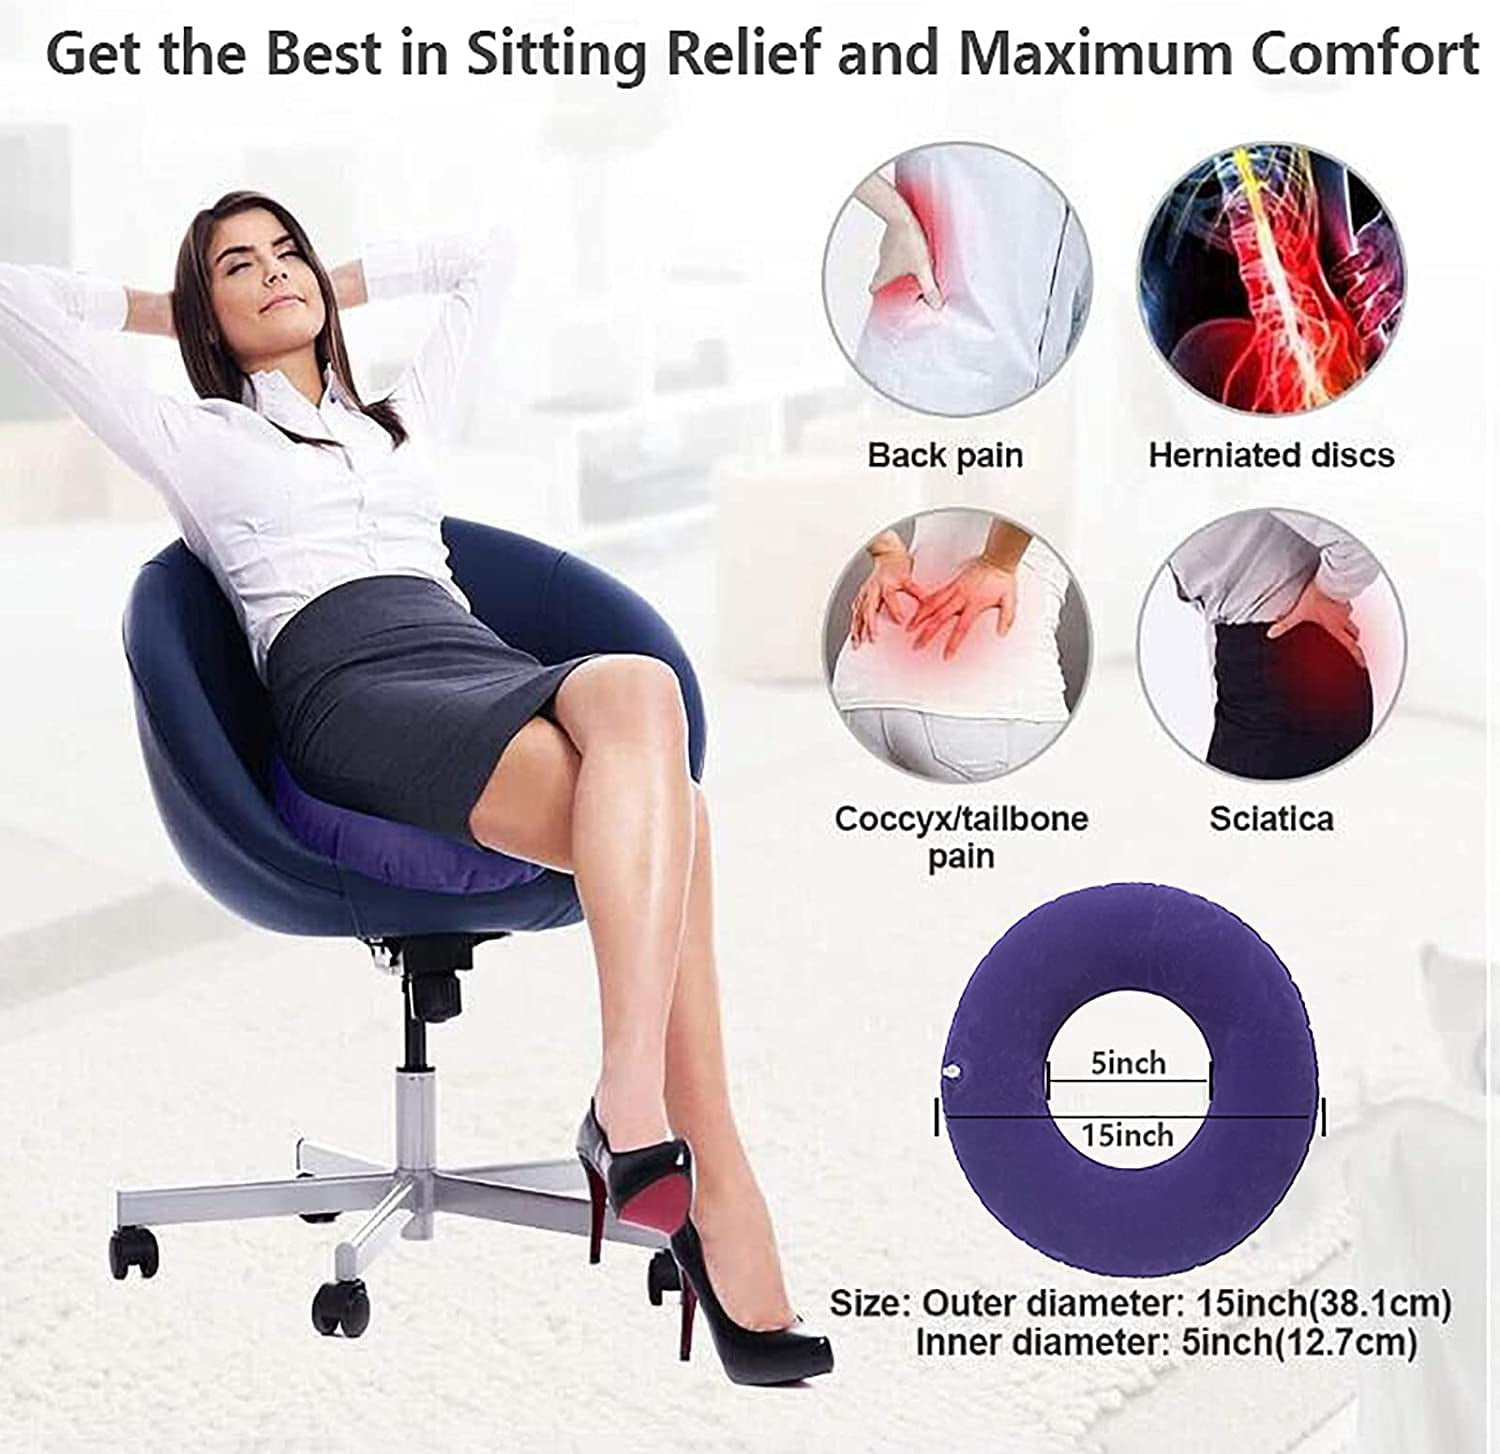 Best Cushions for Pressure Sores on Buttocks - Juhi